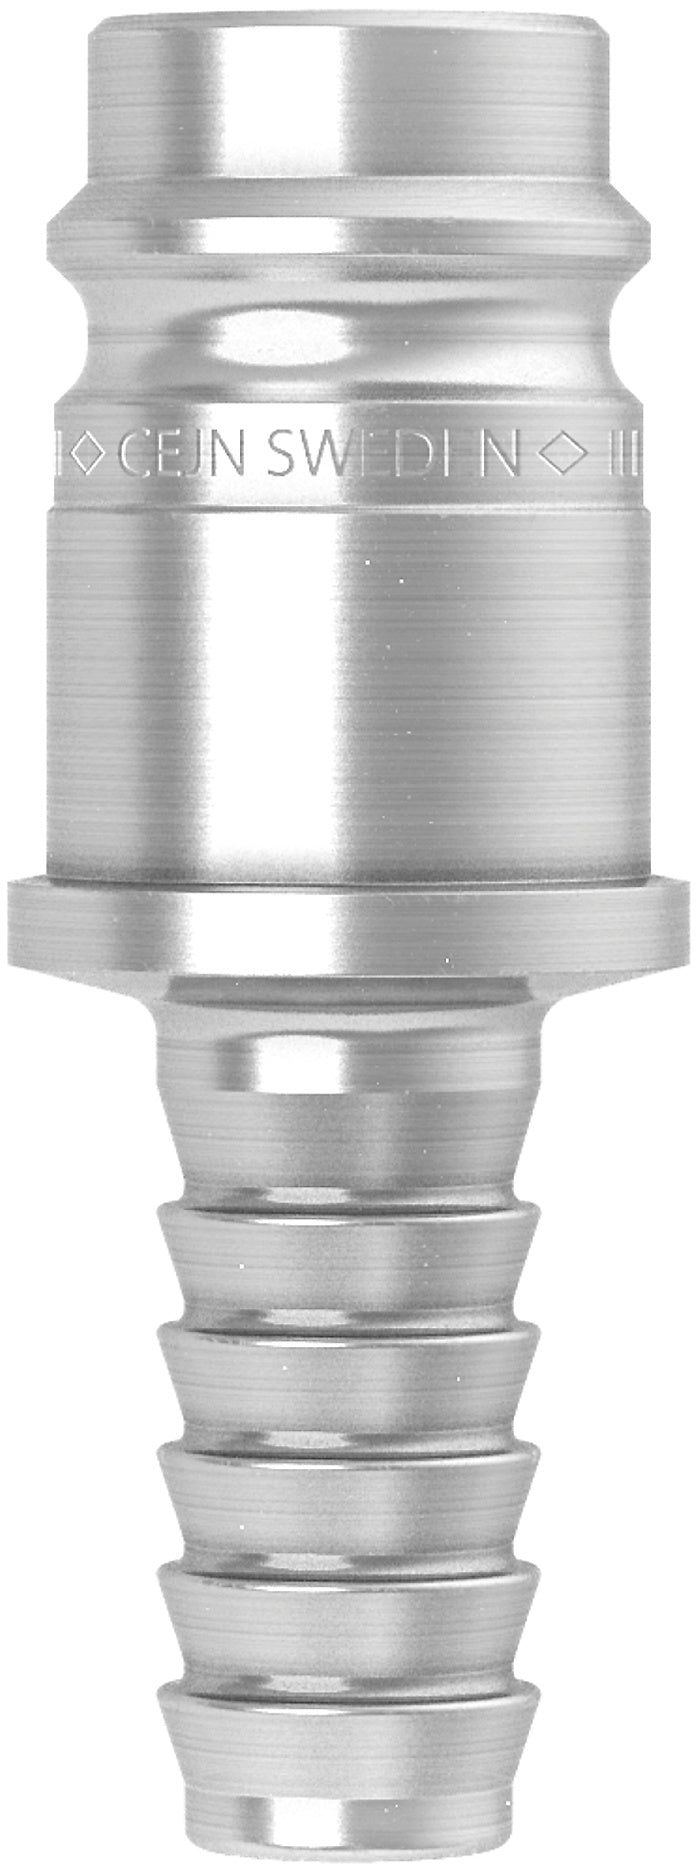 CEJN 10-320-2202 | Female Vented Safety Coupling, G 1/4"